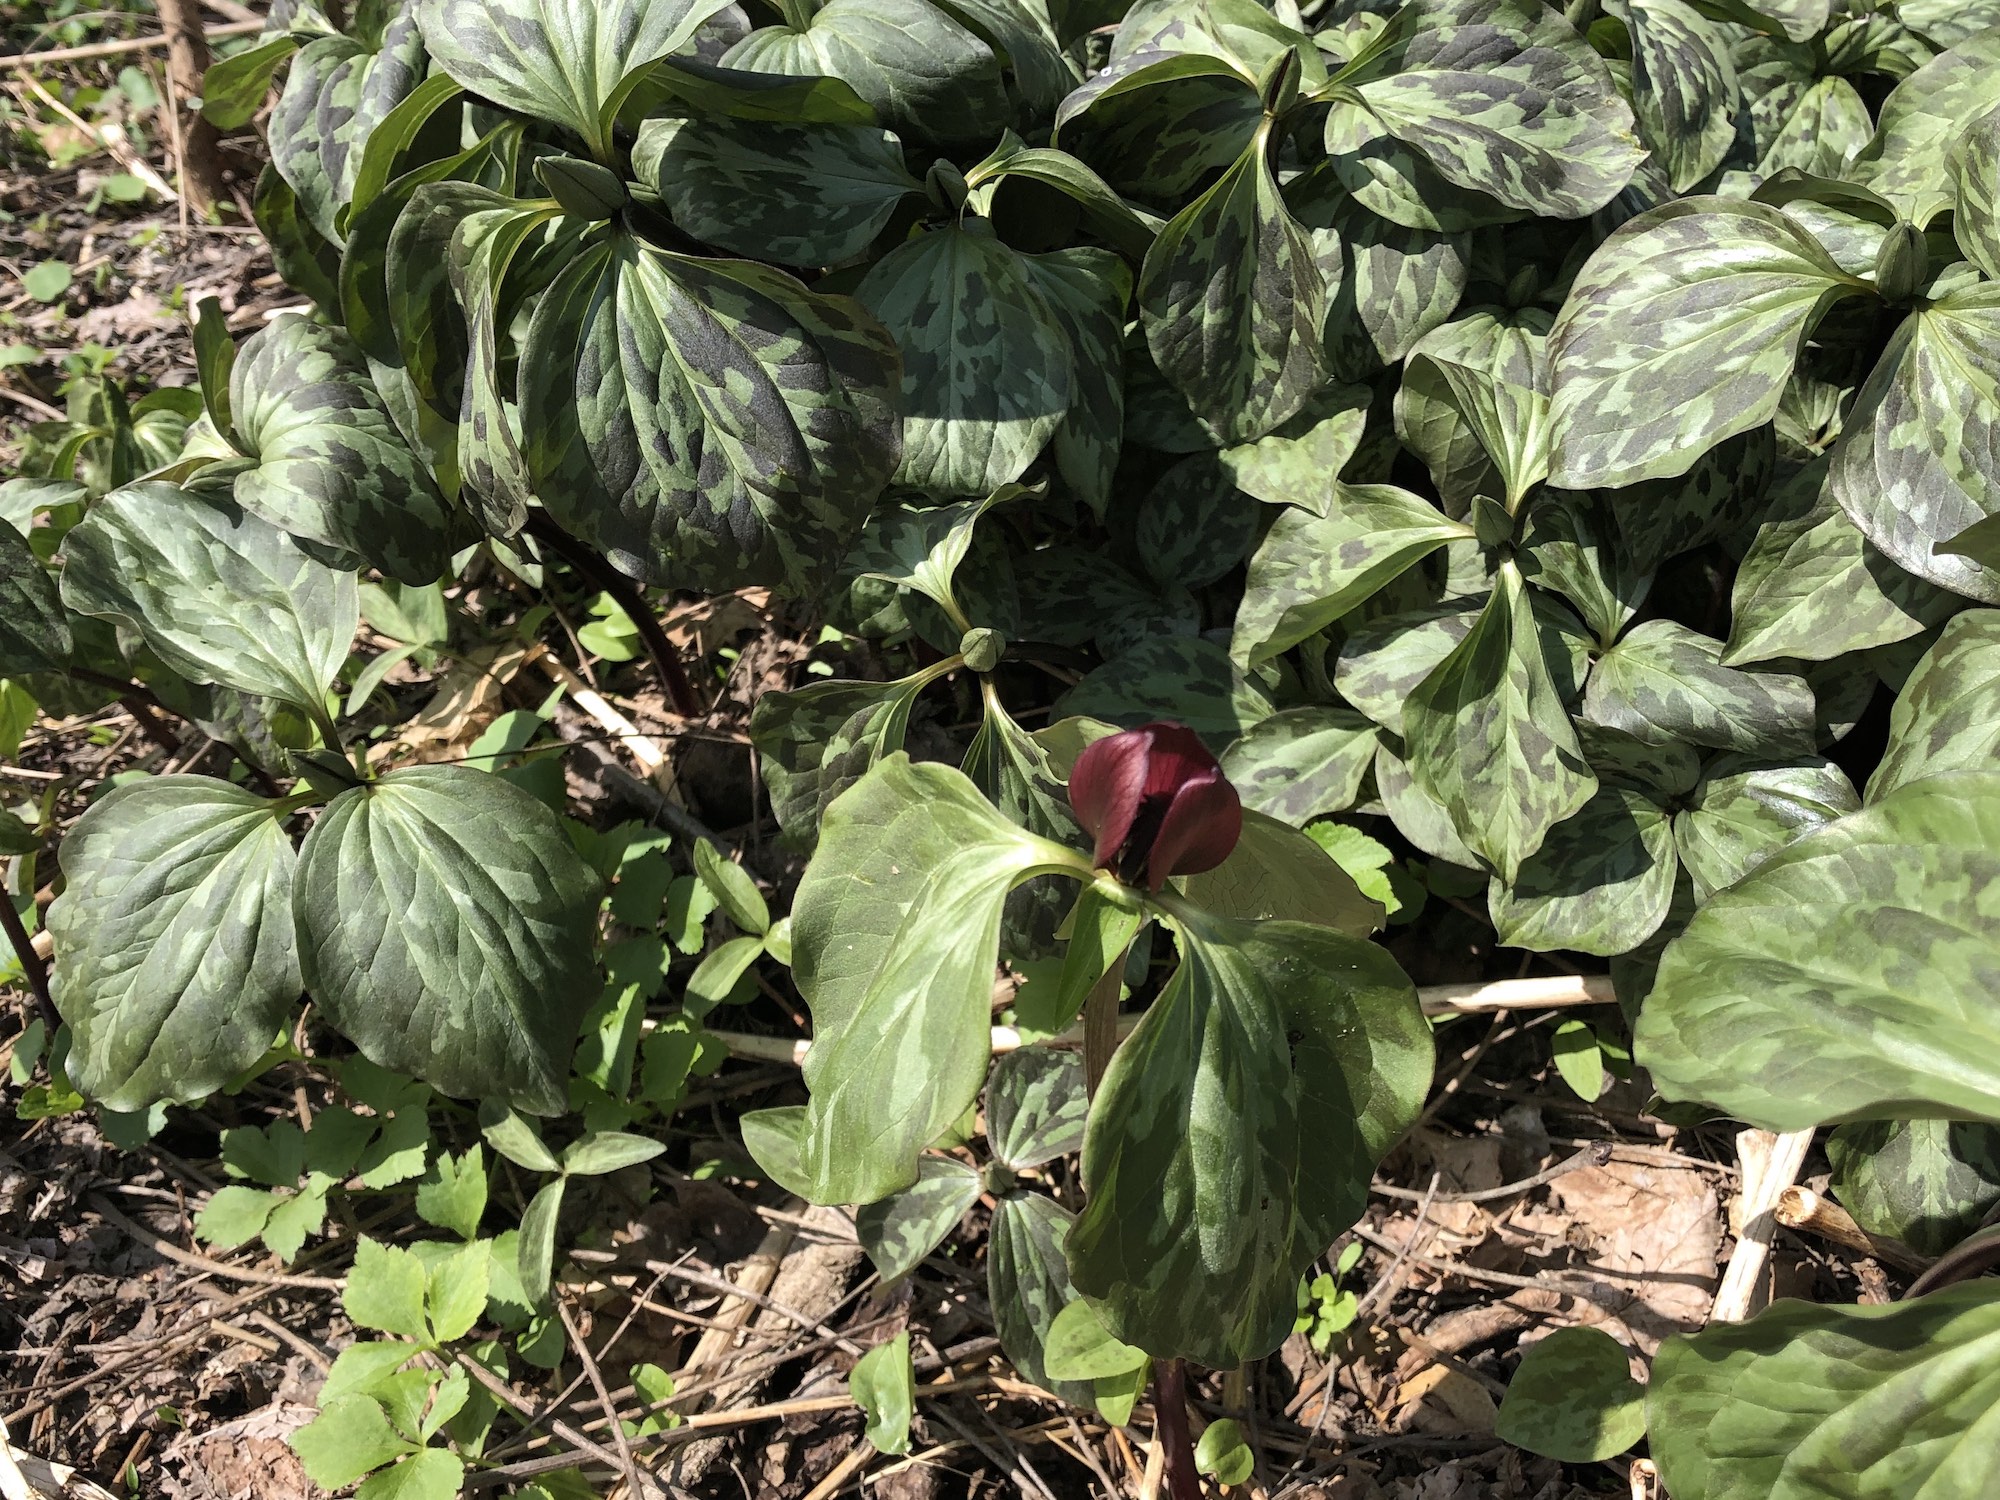 Trillium off of bike path between Marion Dunn and Duck Pond on April 24, 2019.